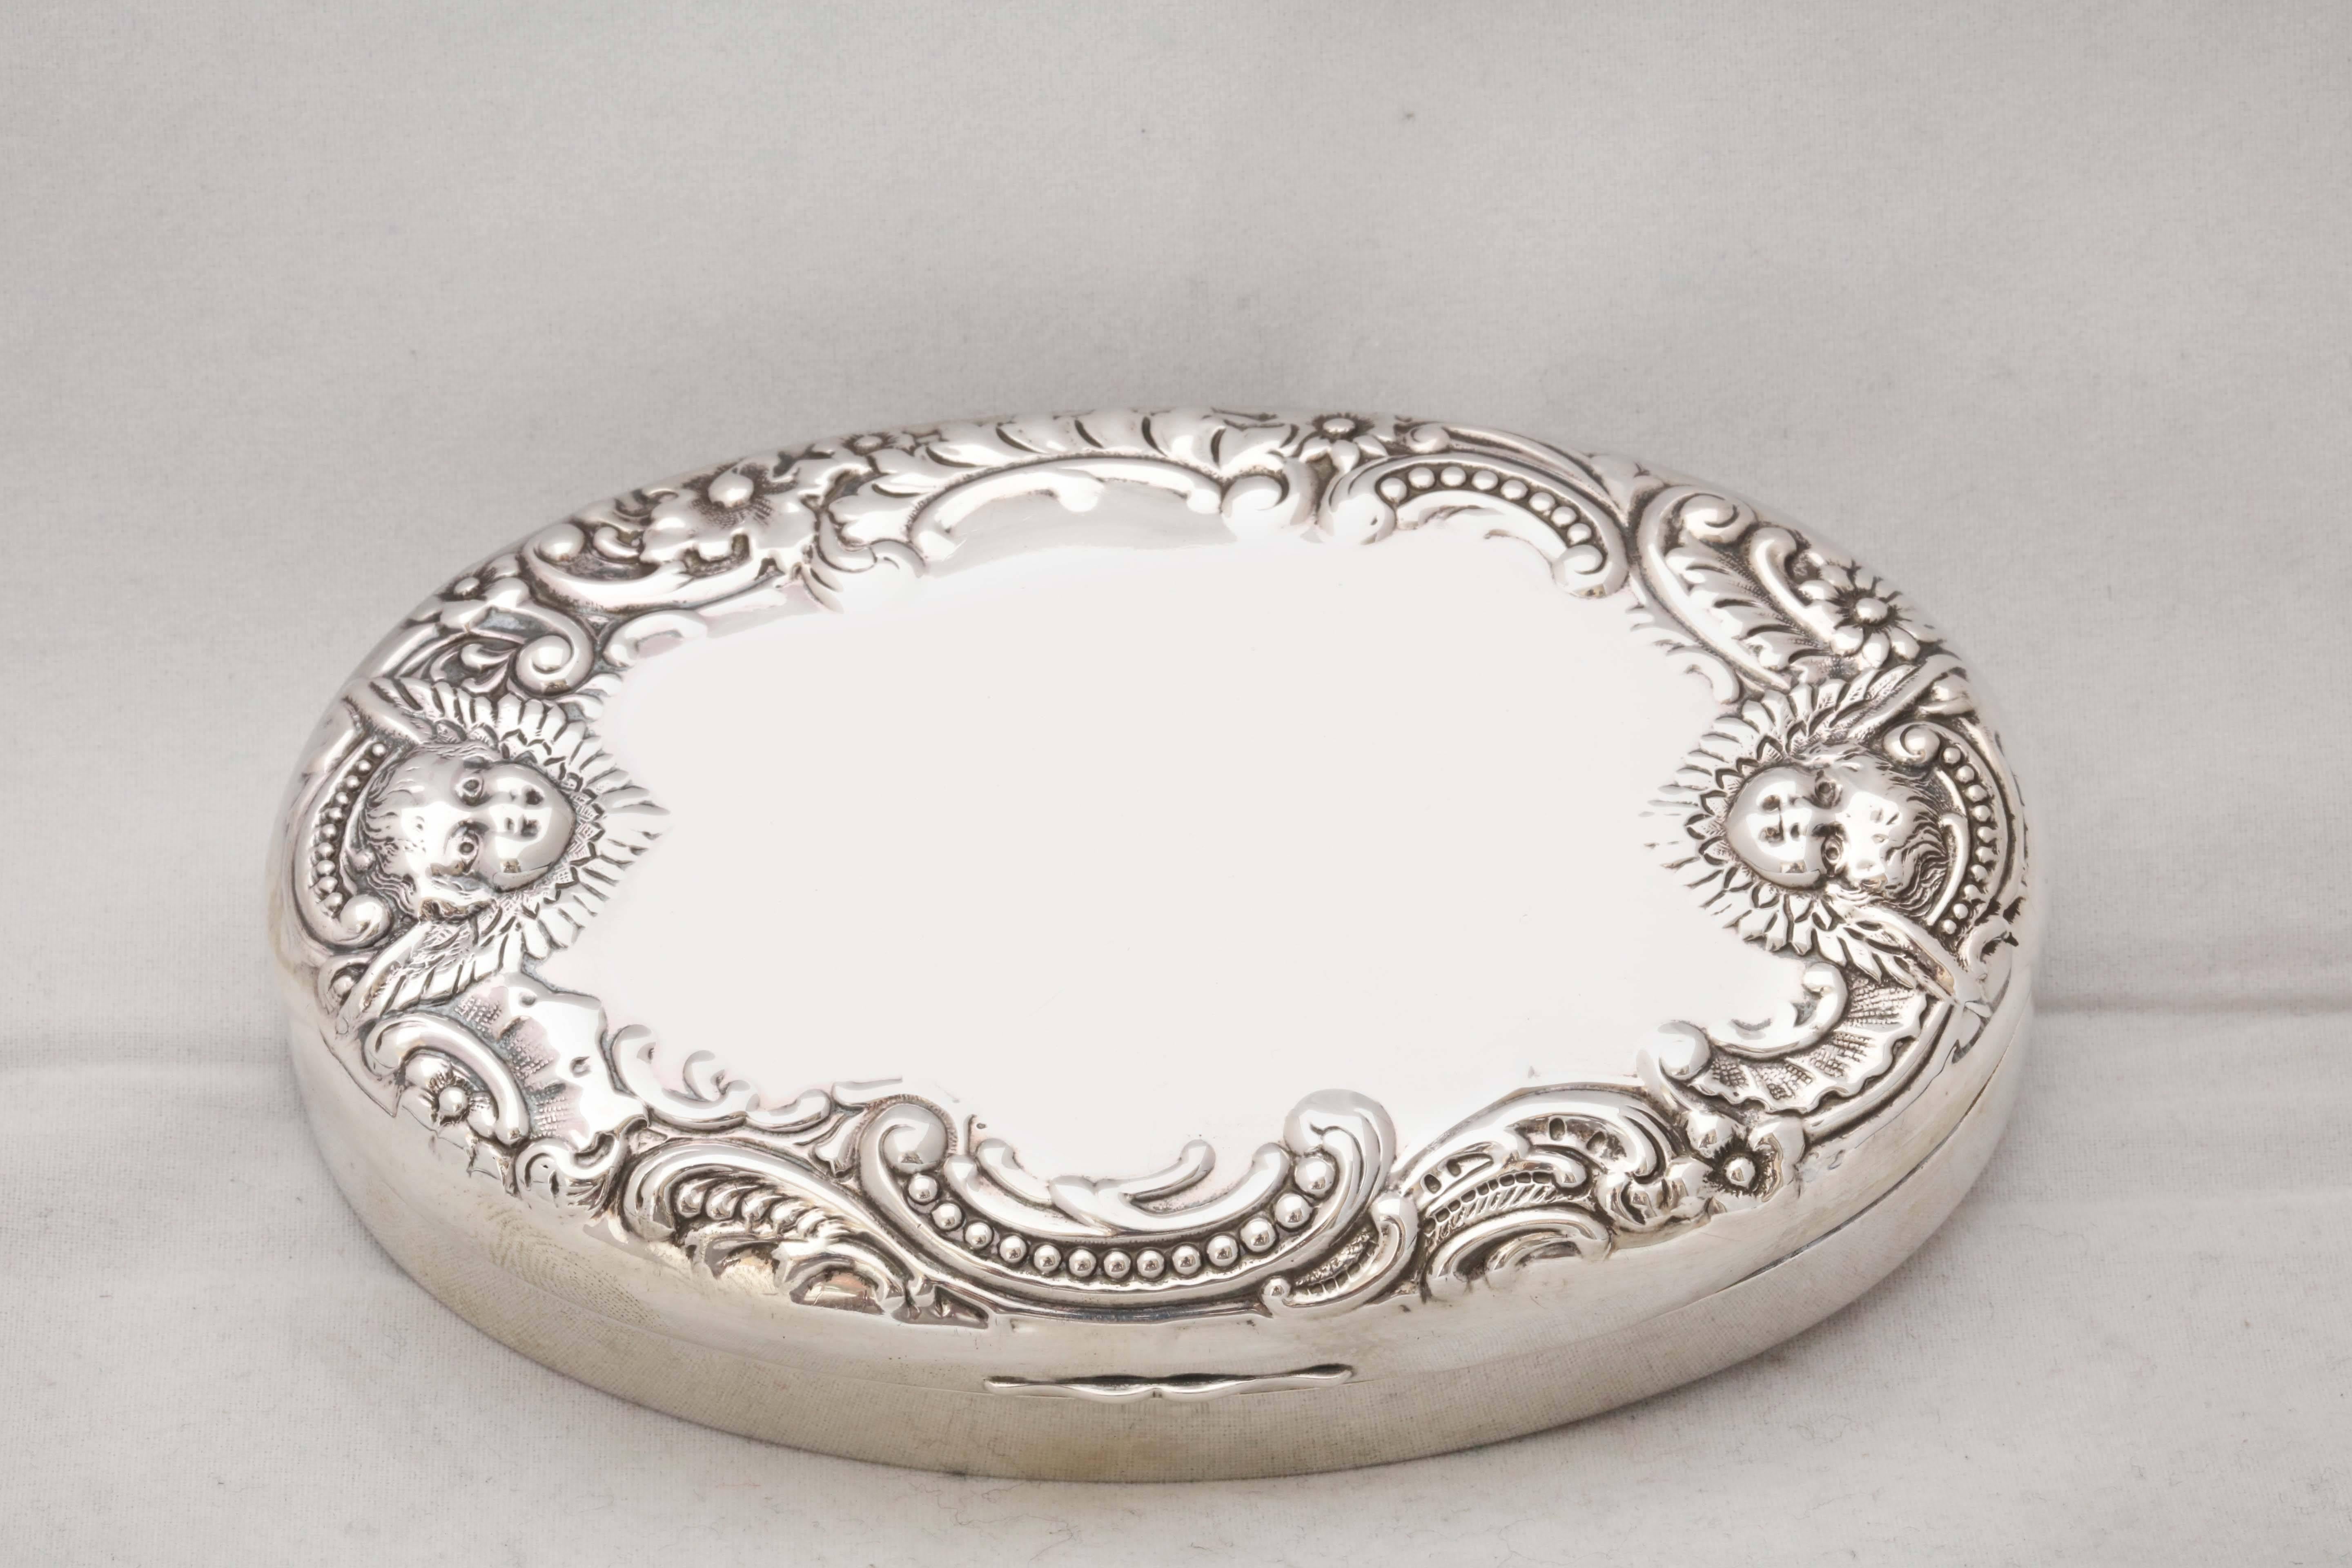 Sterling silver, Victorian trinkets or jewelry box with hinged lid, Dominick & Haff, New York, year marked for 1893. Hinged lid is decorated with swirls and a cherubs. Measures: 5